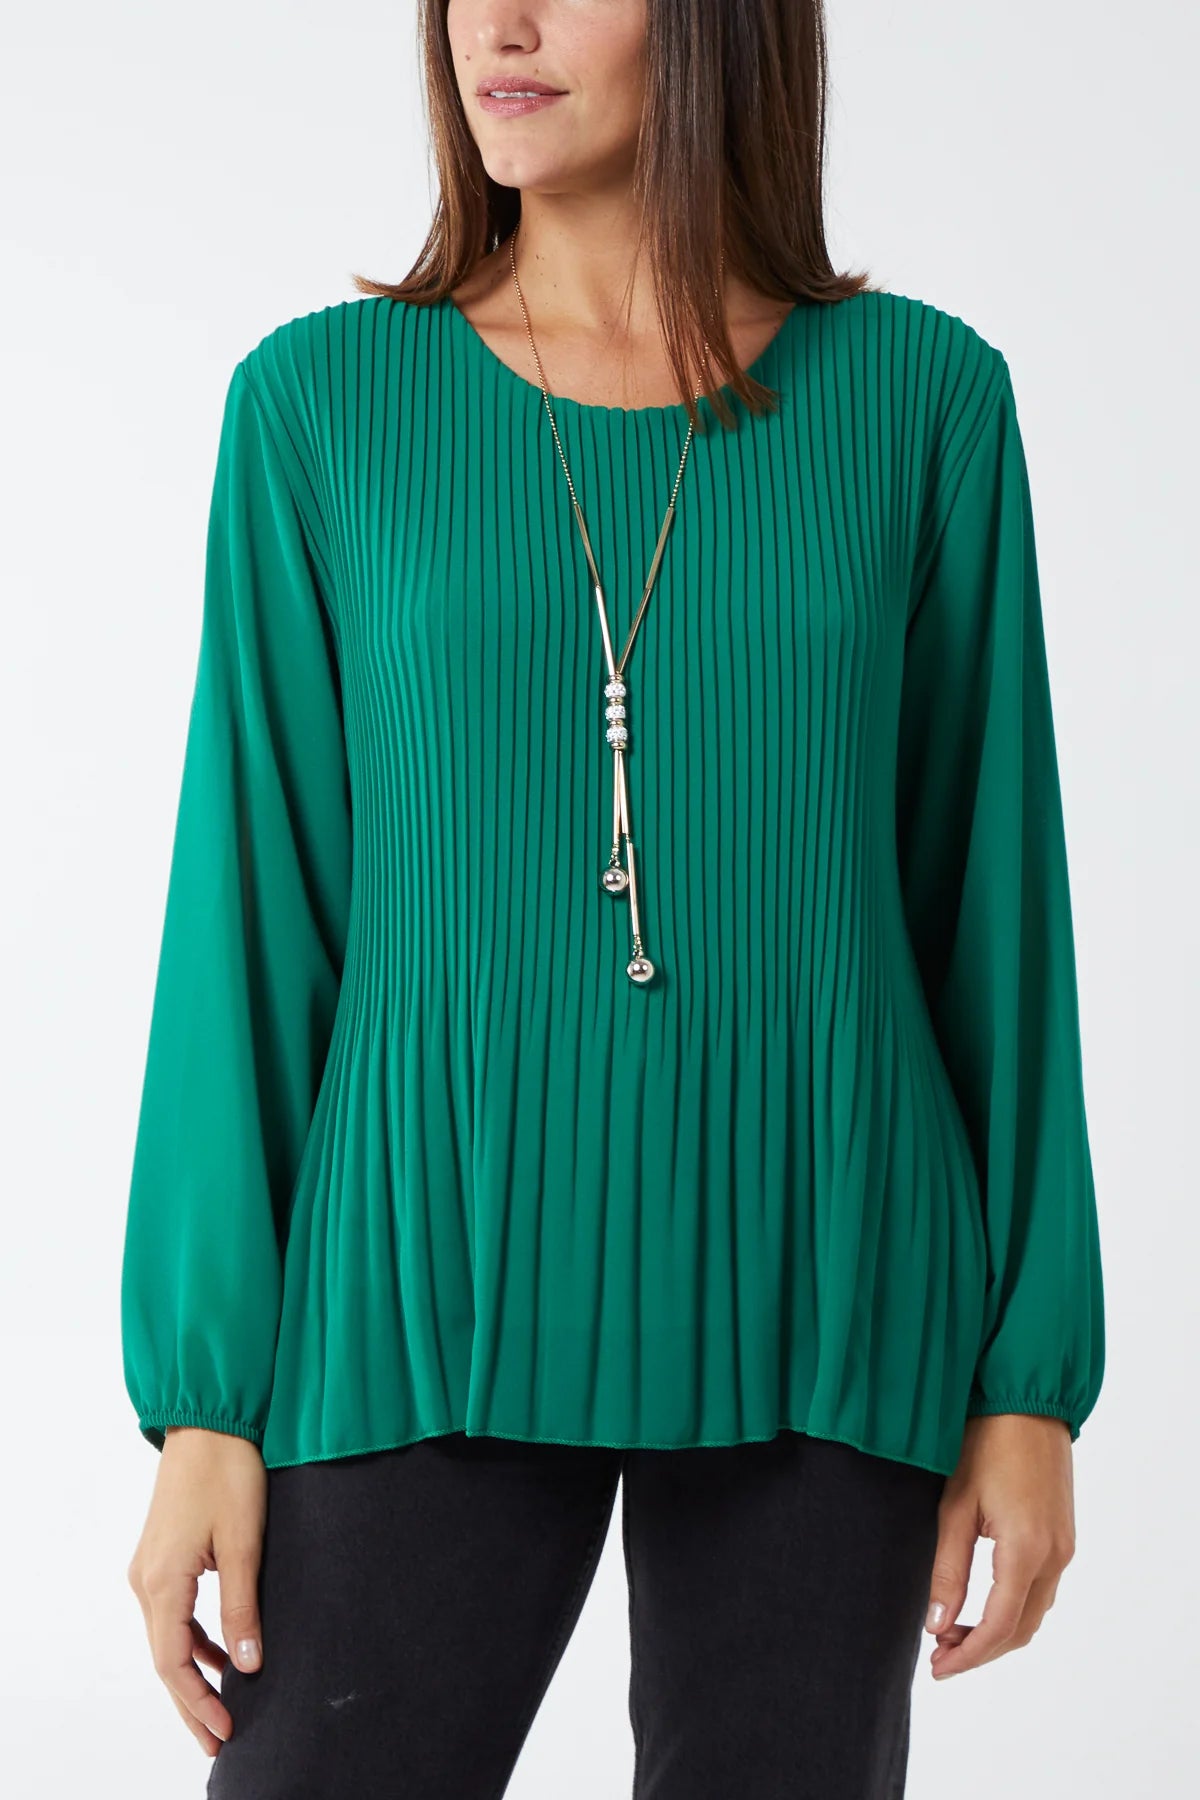 Angie Pleat Blouse Necklace Top